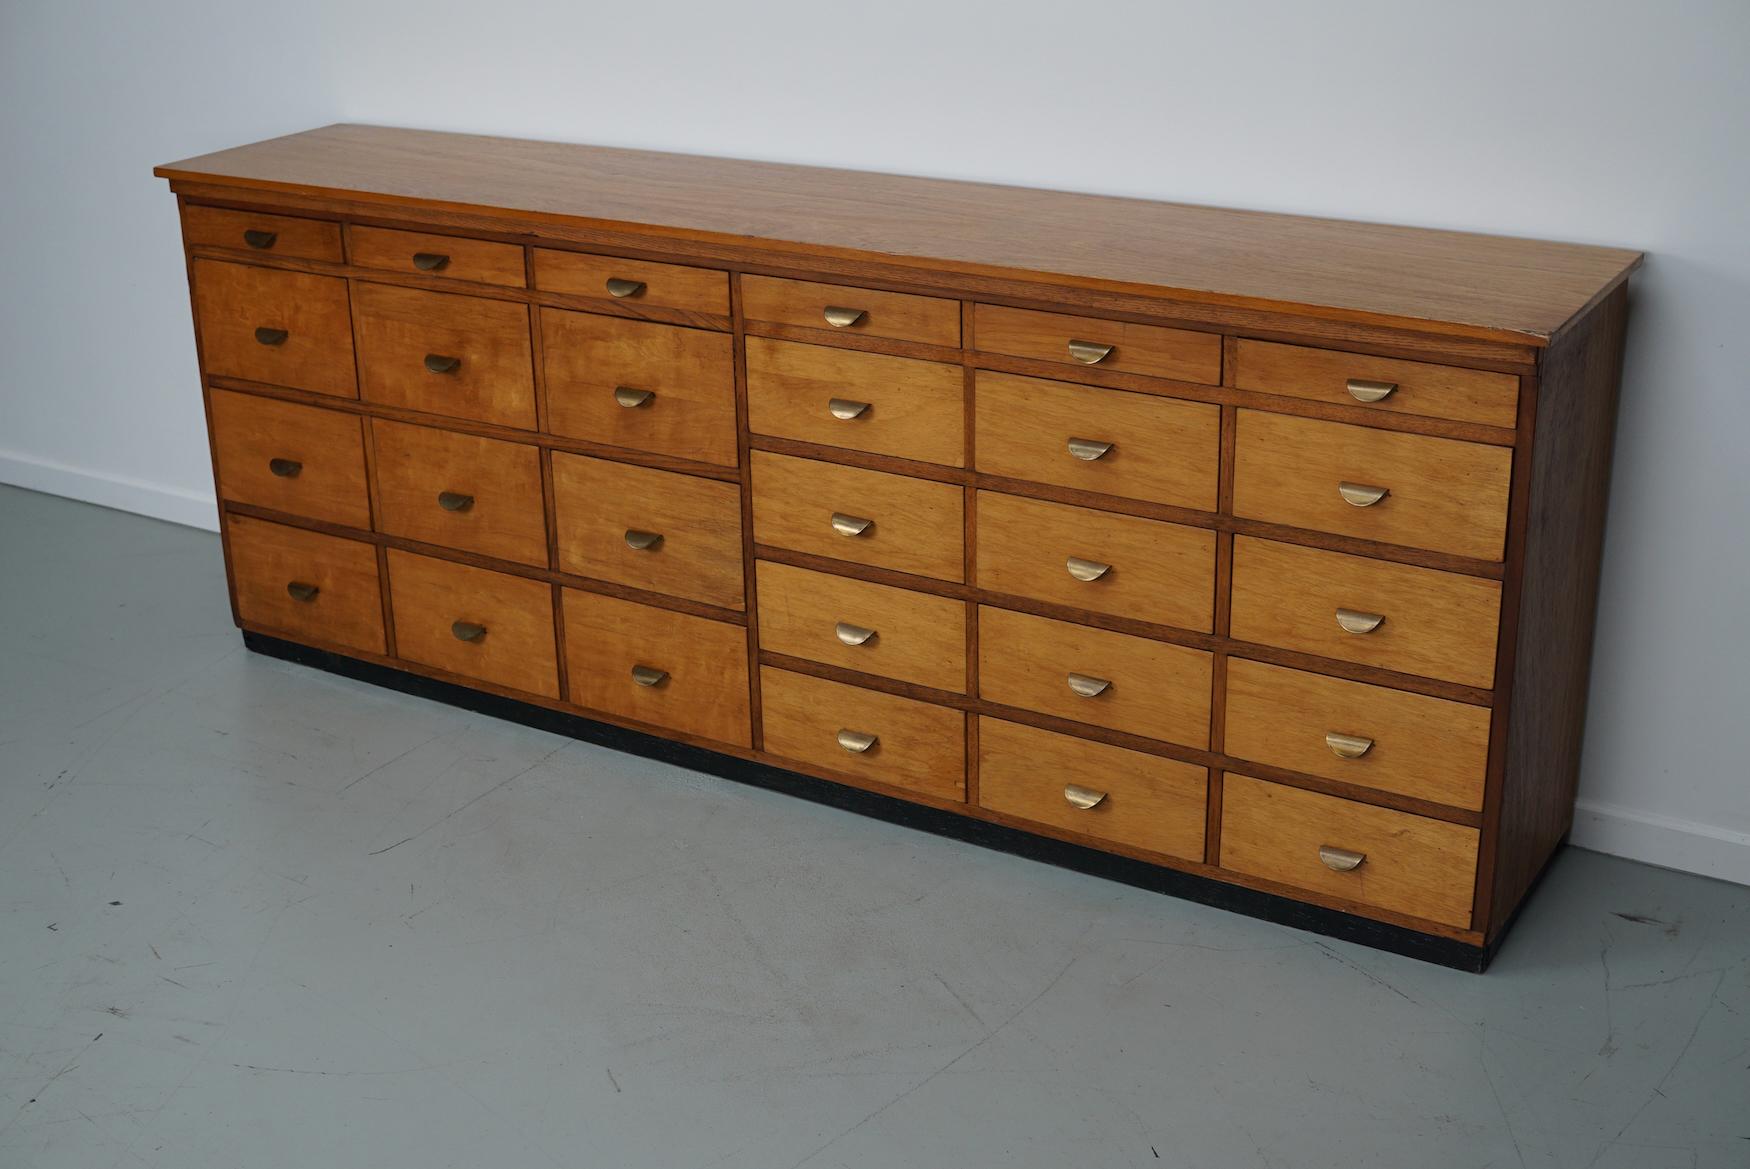  Dutch Industrial Beech Apothecary Cabinet, Mid-20th Century 11